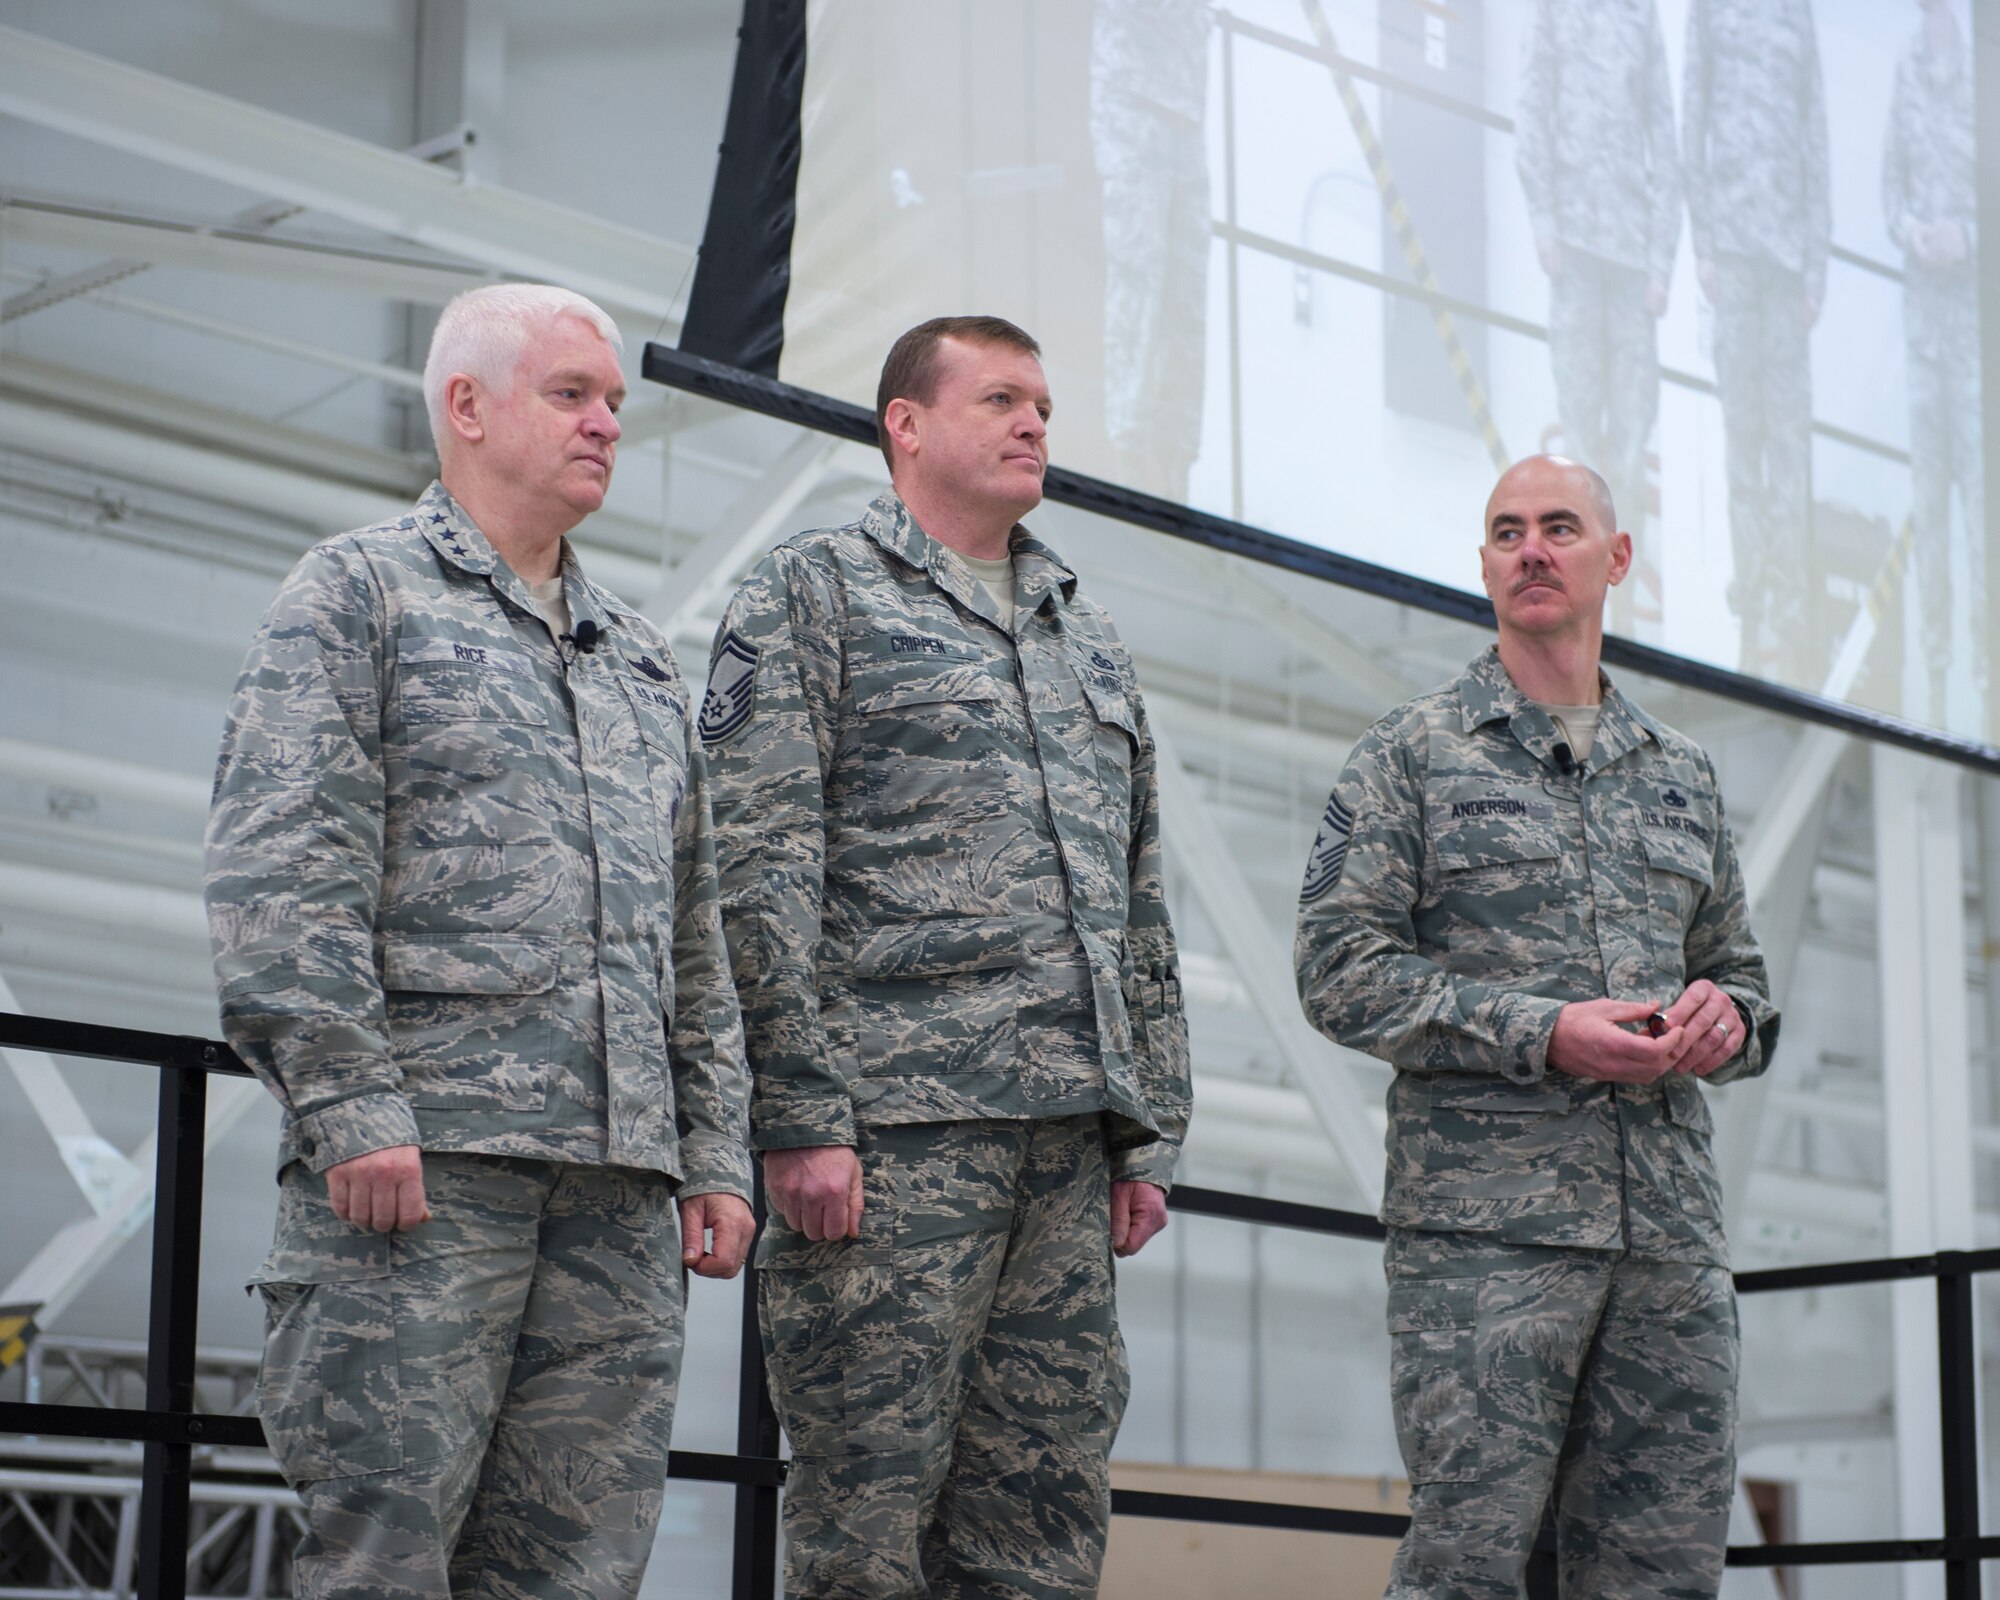 U.S. Air Force Senior Master Sgt. Richard Crippen, center, 133rd Operations Group, is recognized and coined for his actions during the 2017 hurricane relief efforts in St. Paul, Minn., March 25, 2018.